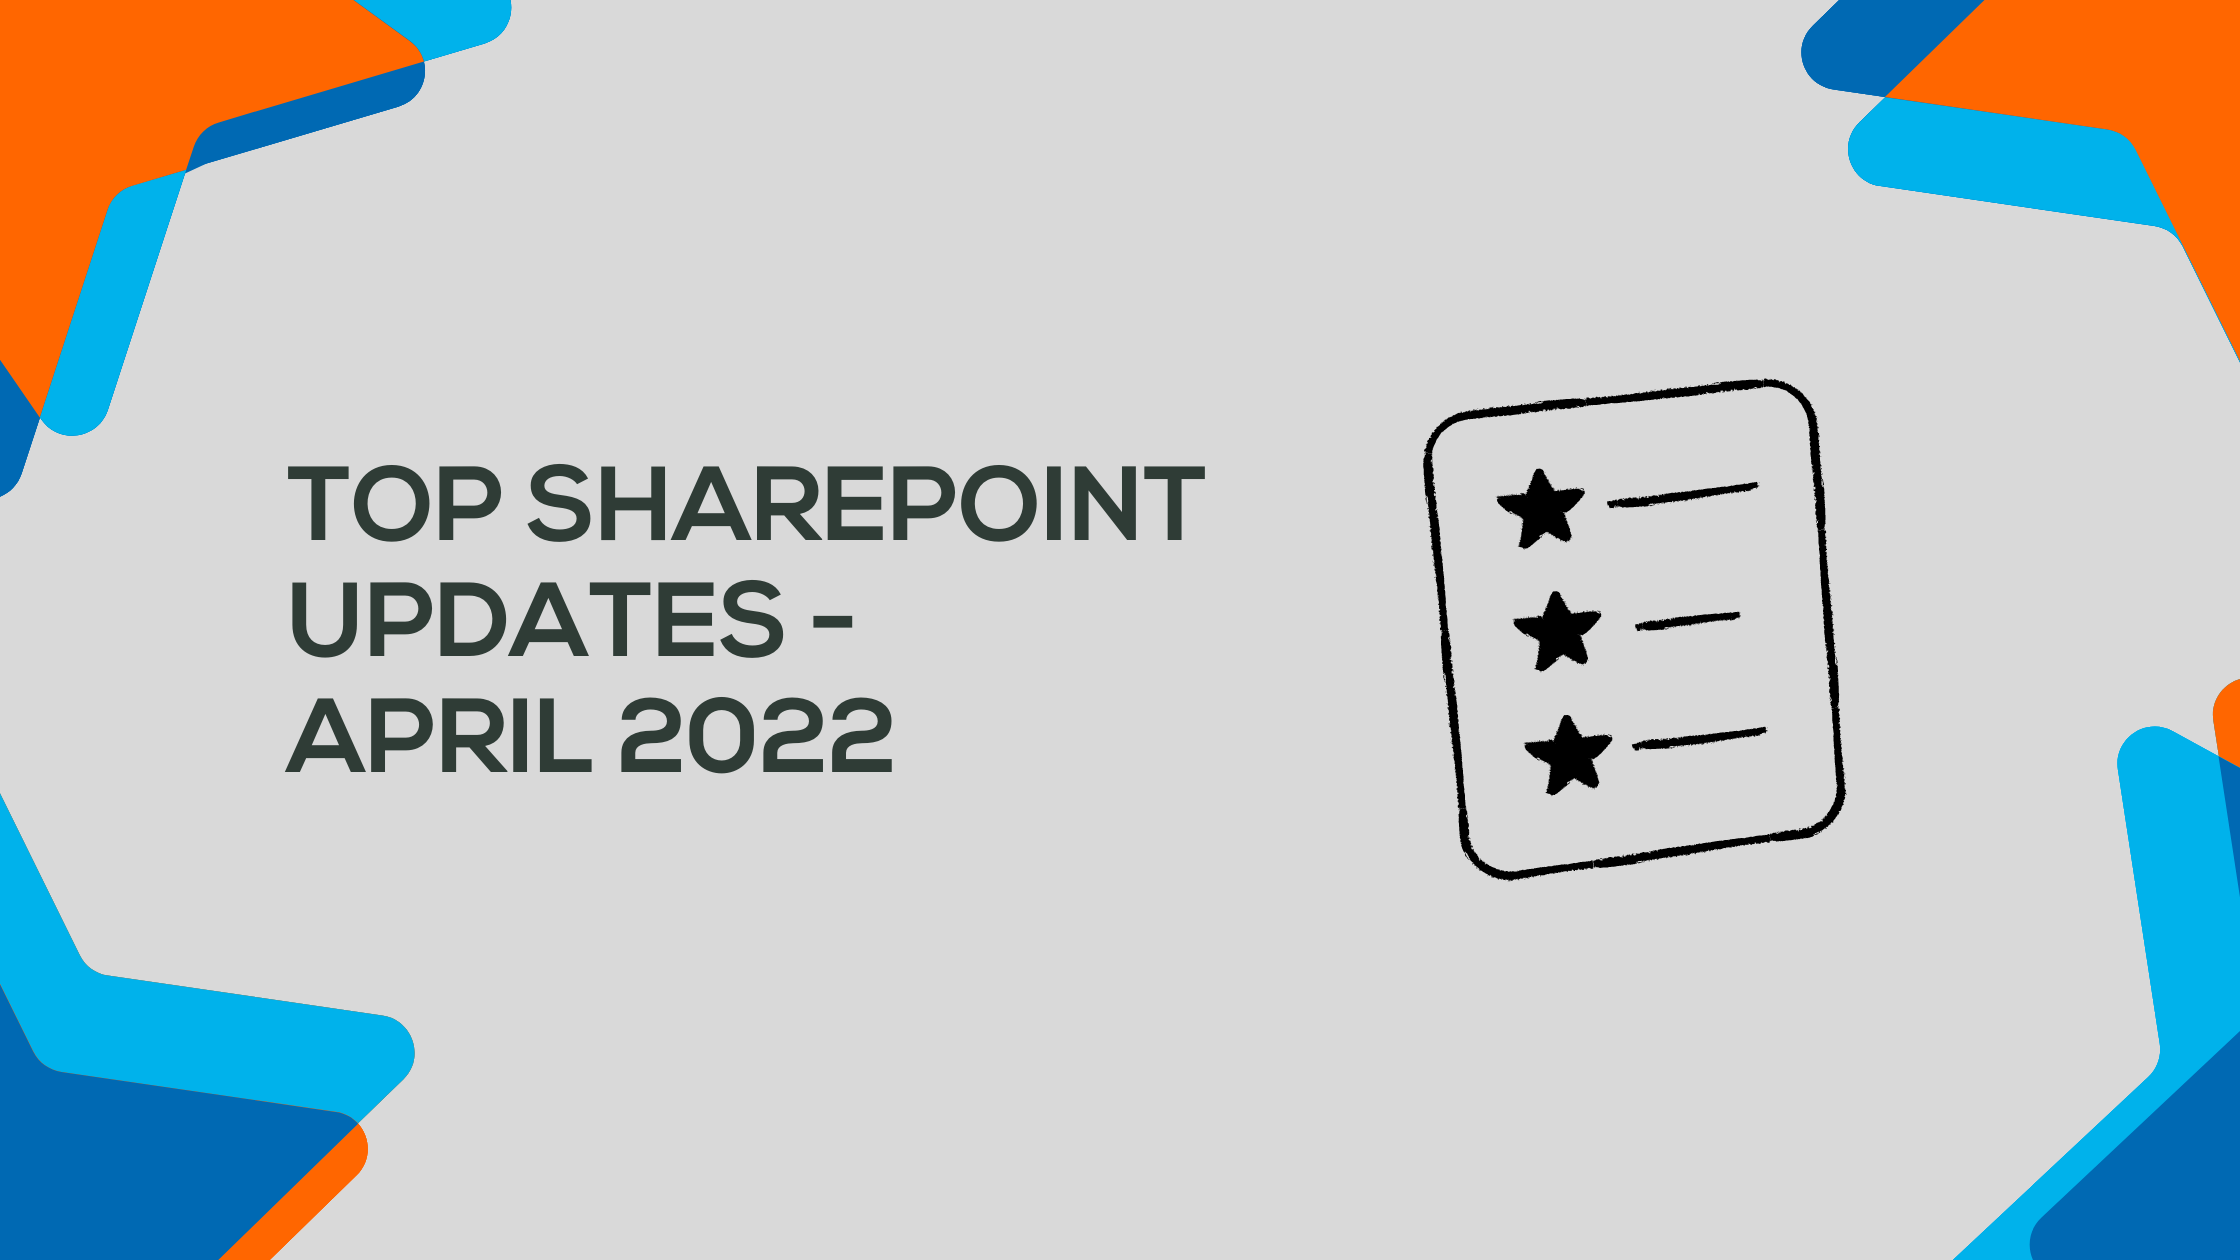 Top SharePoint features rolled out in April 2022 - Dock 365 blog